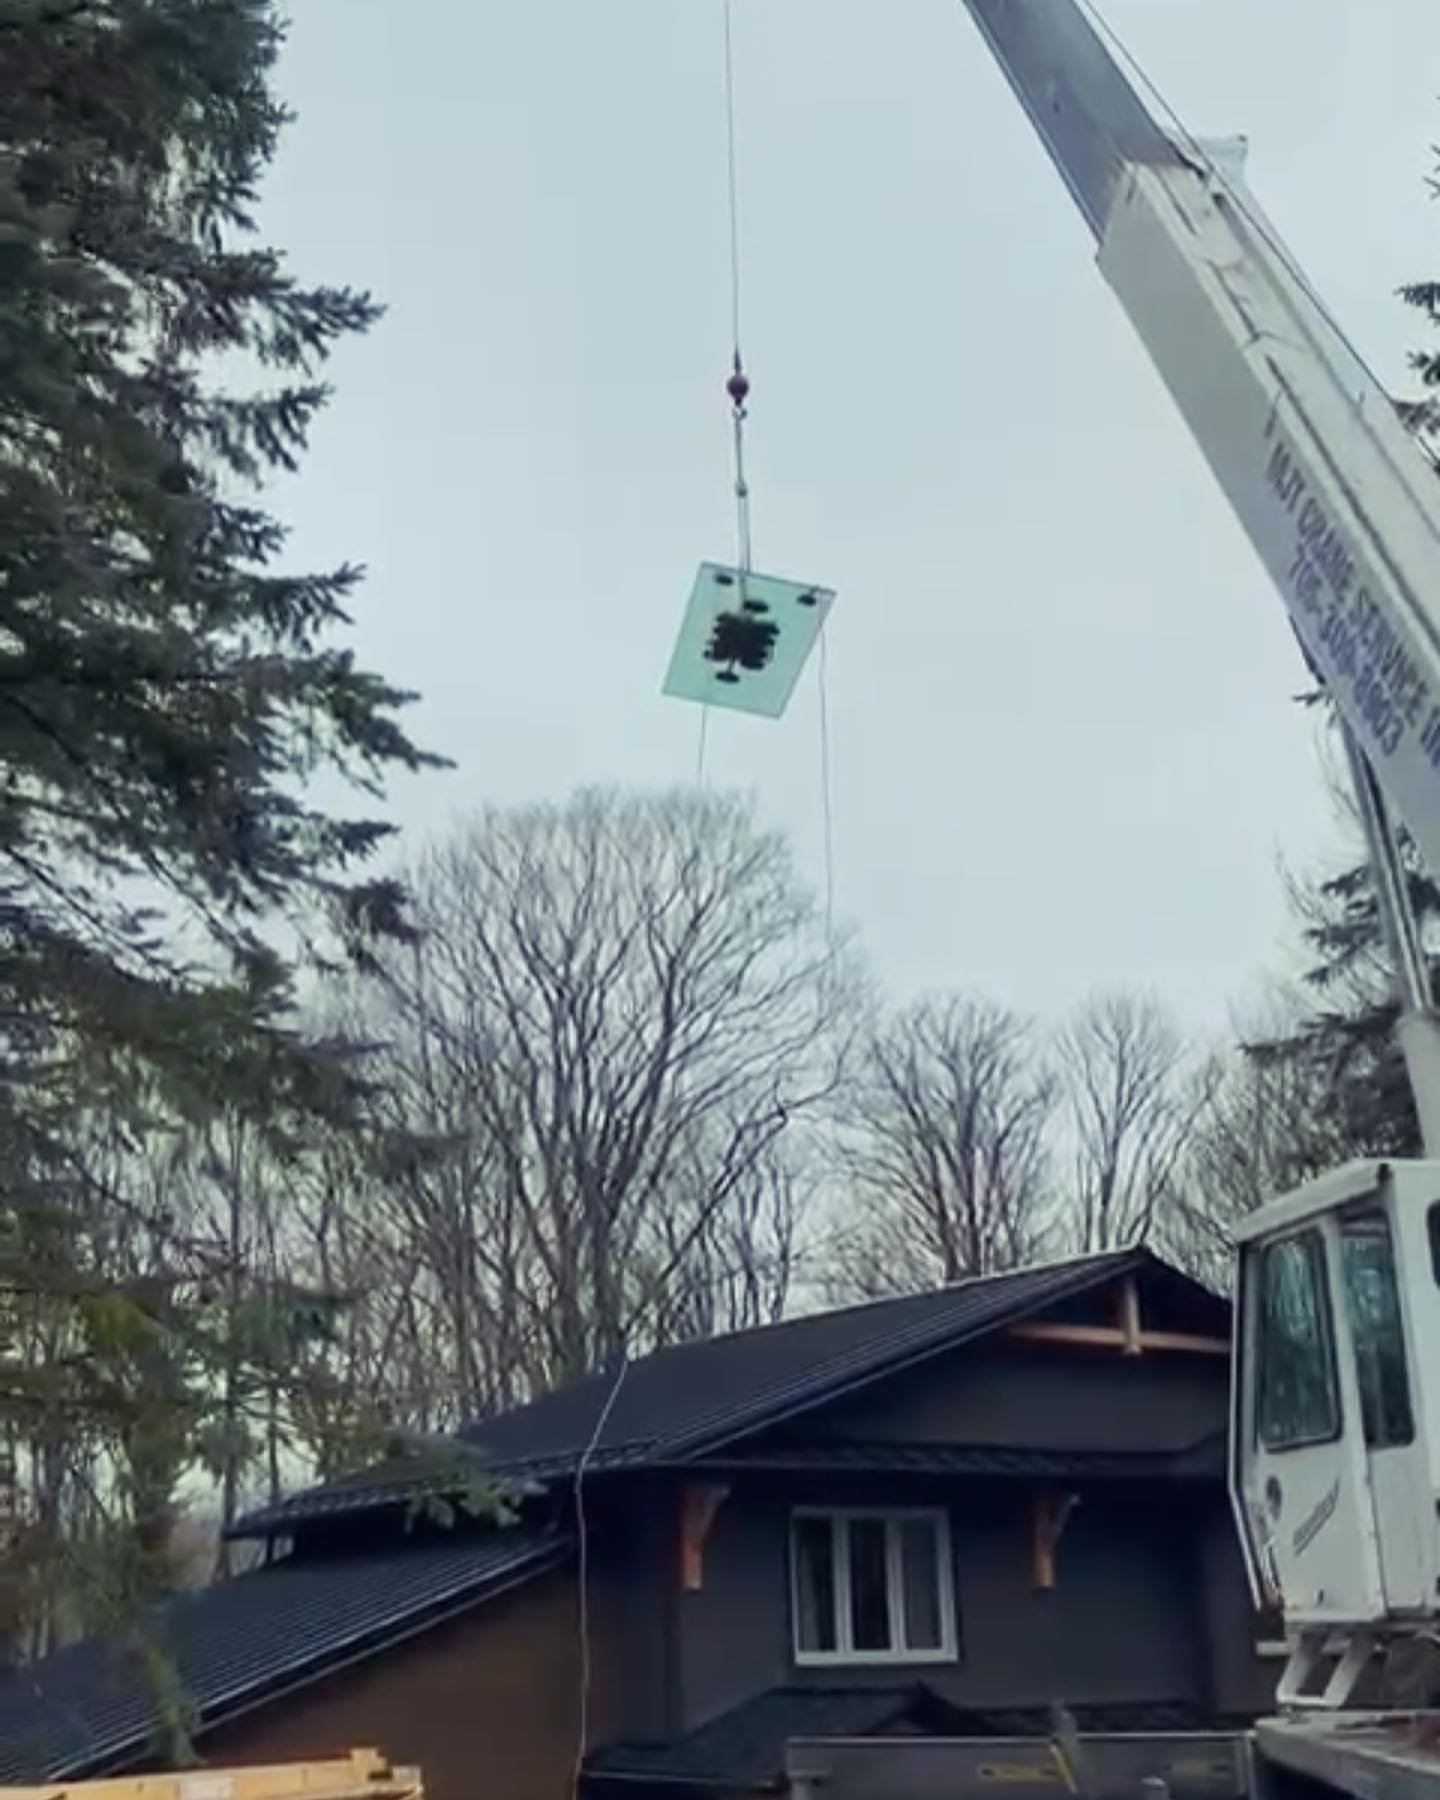 Where there&rsquo;s a will there&rsquo;s a way - crane day for an incredible glass install !!